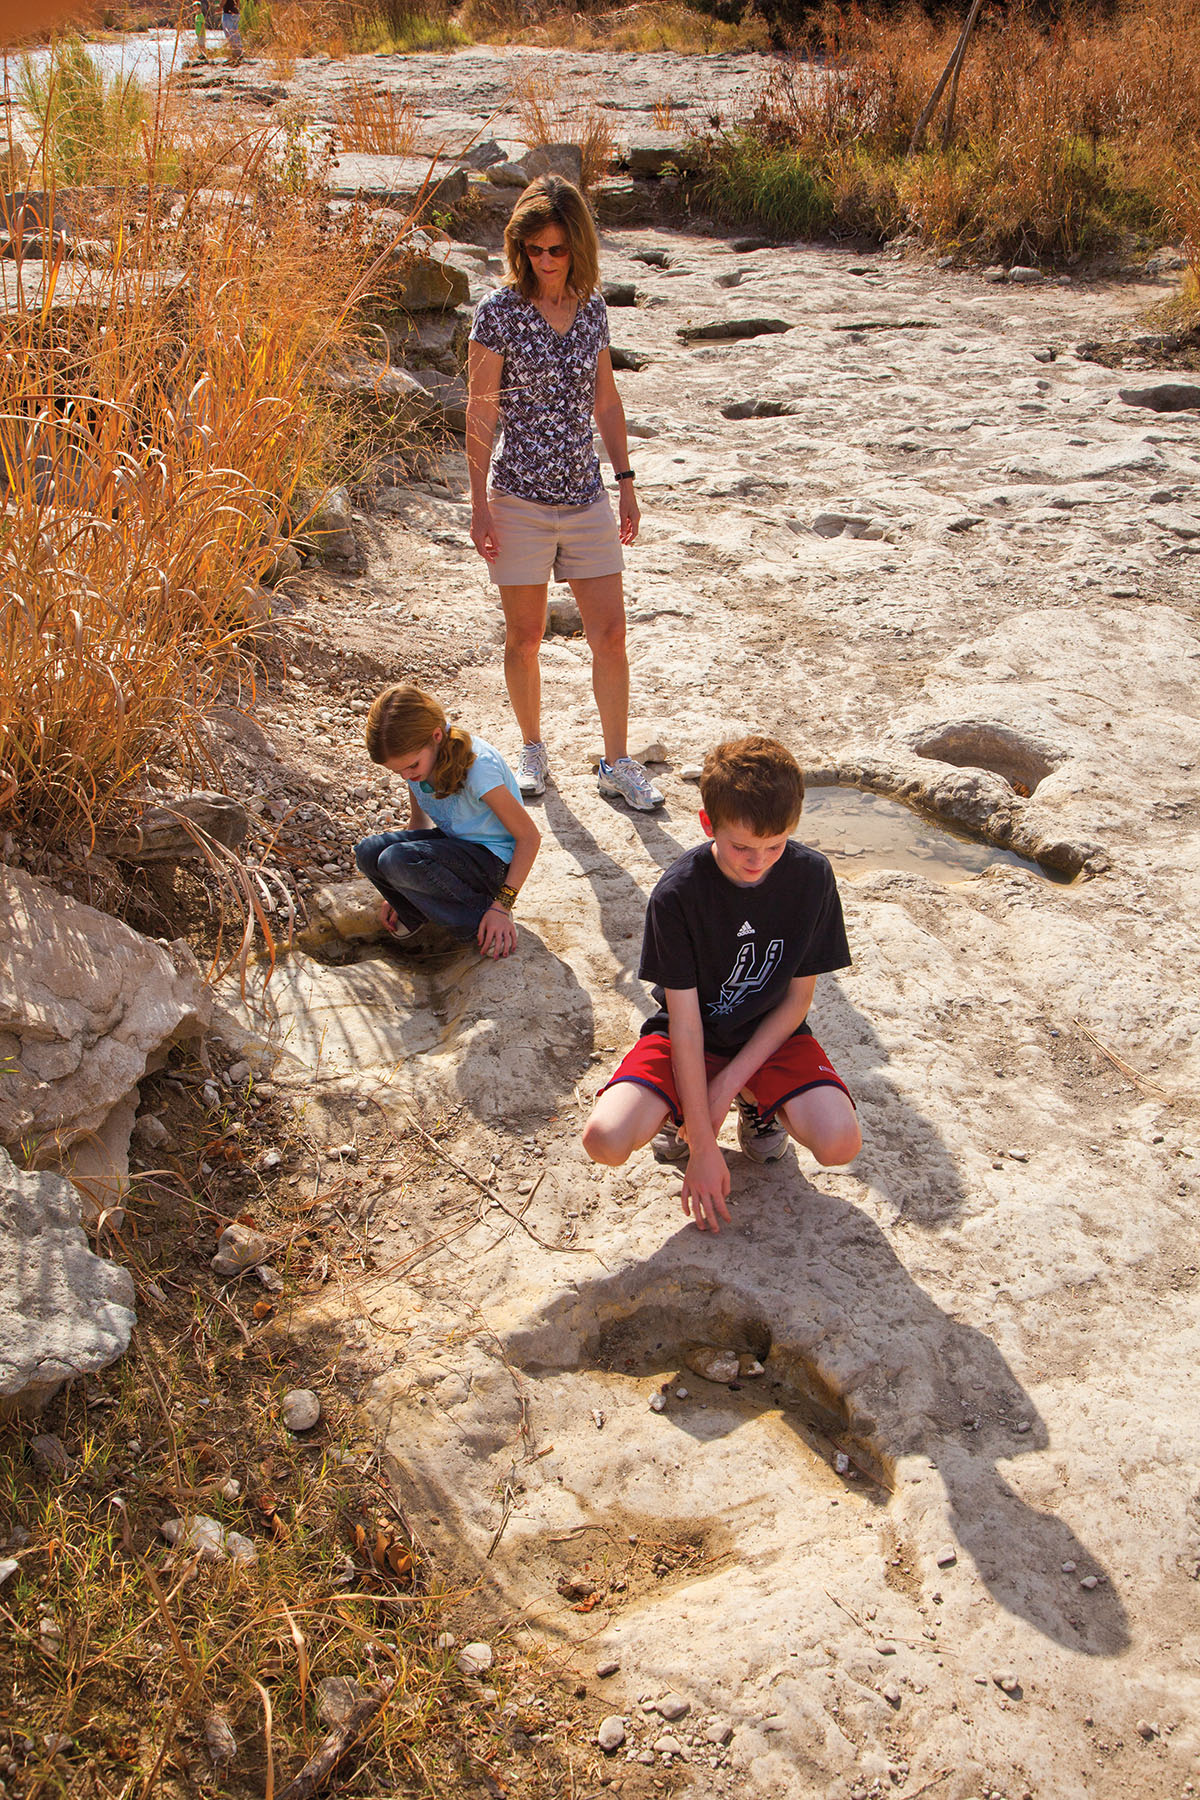 A woman and two children examine rock formations on a sunny way